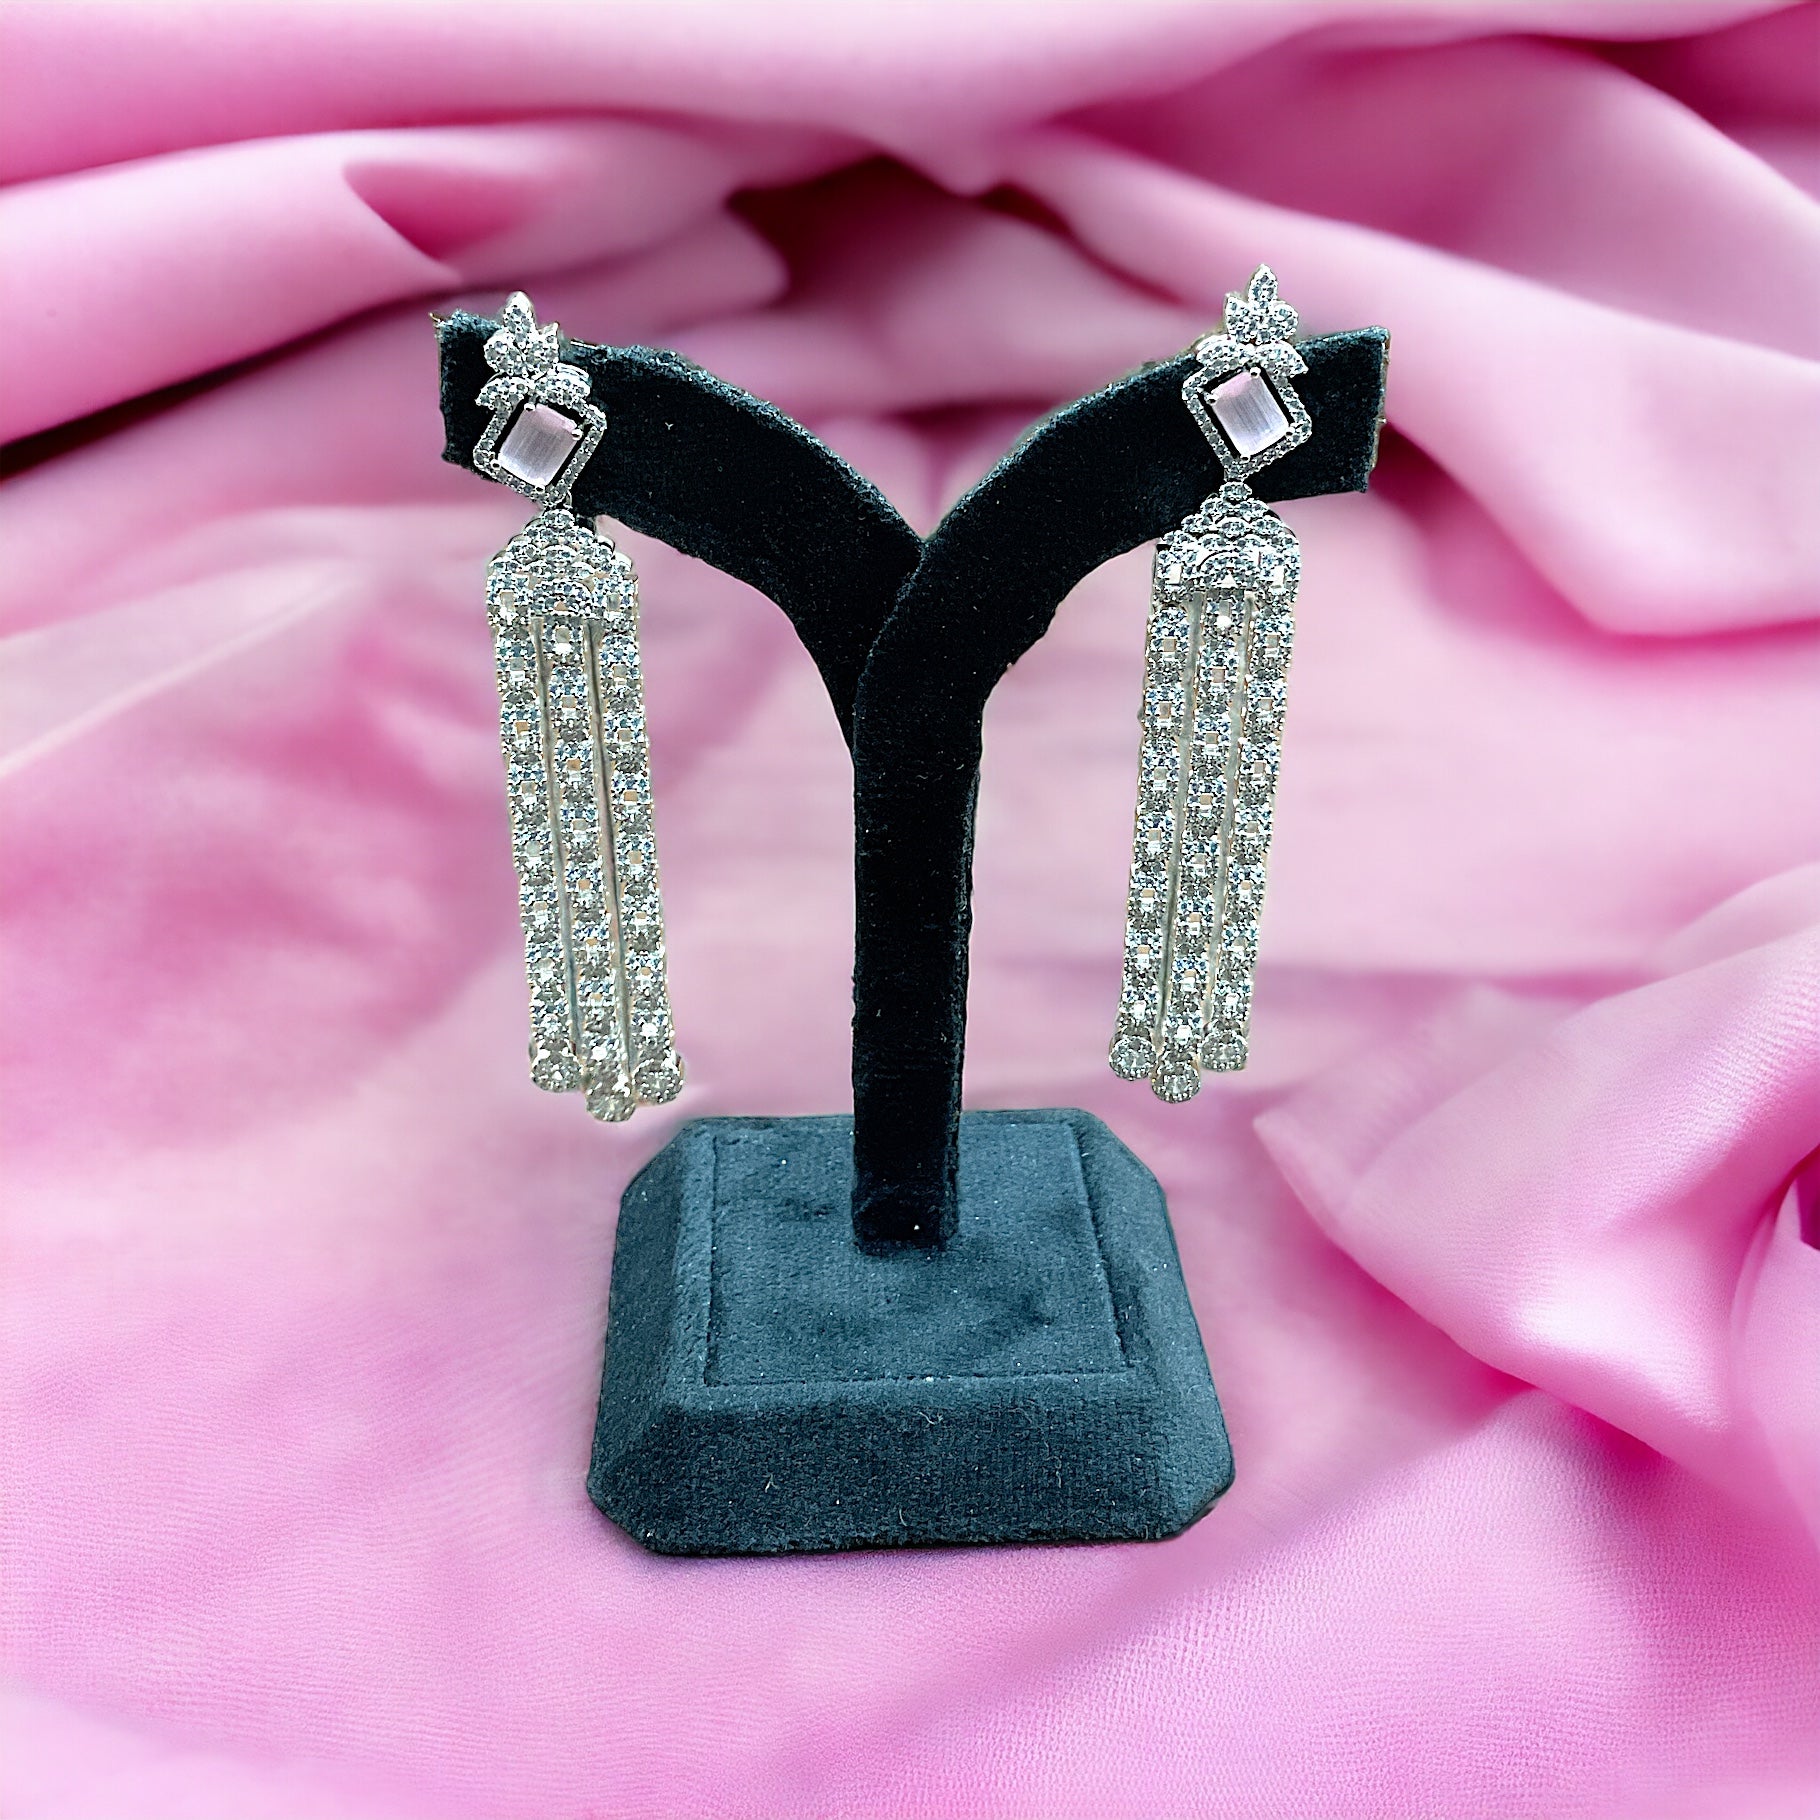 Silver Pink Square Diamond Earrings With Screw Back